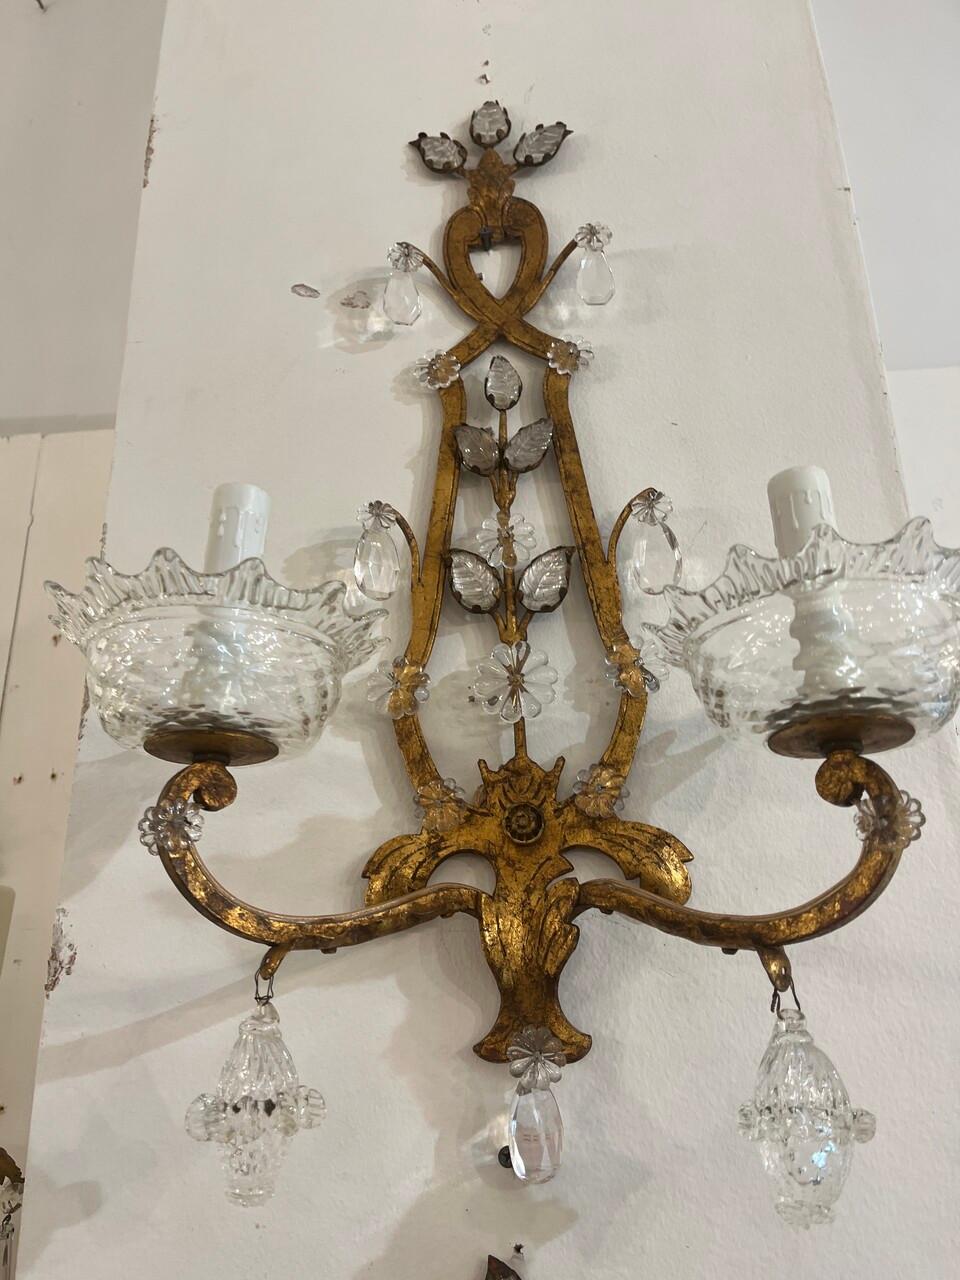 Illuminate your space with the glamour of the 1930's through this stunning pair of Art Deco Murano gilt wall sconces. Crafted with exquisite detail, their opulent design features intricate glasswork and lavish gilding, evoking the elegance of 1920s